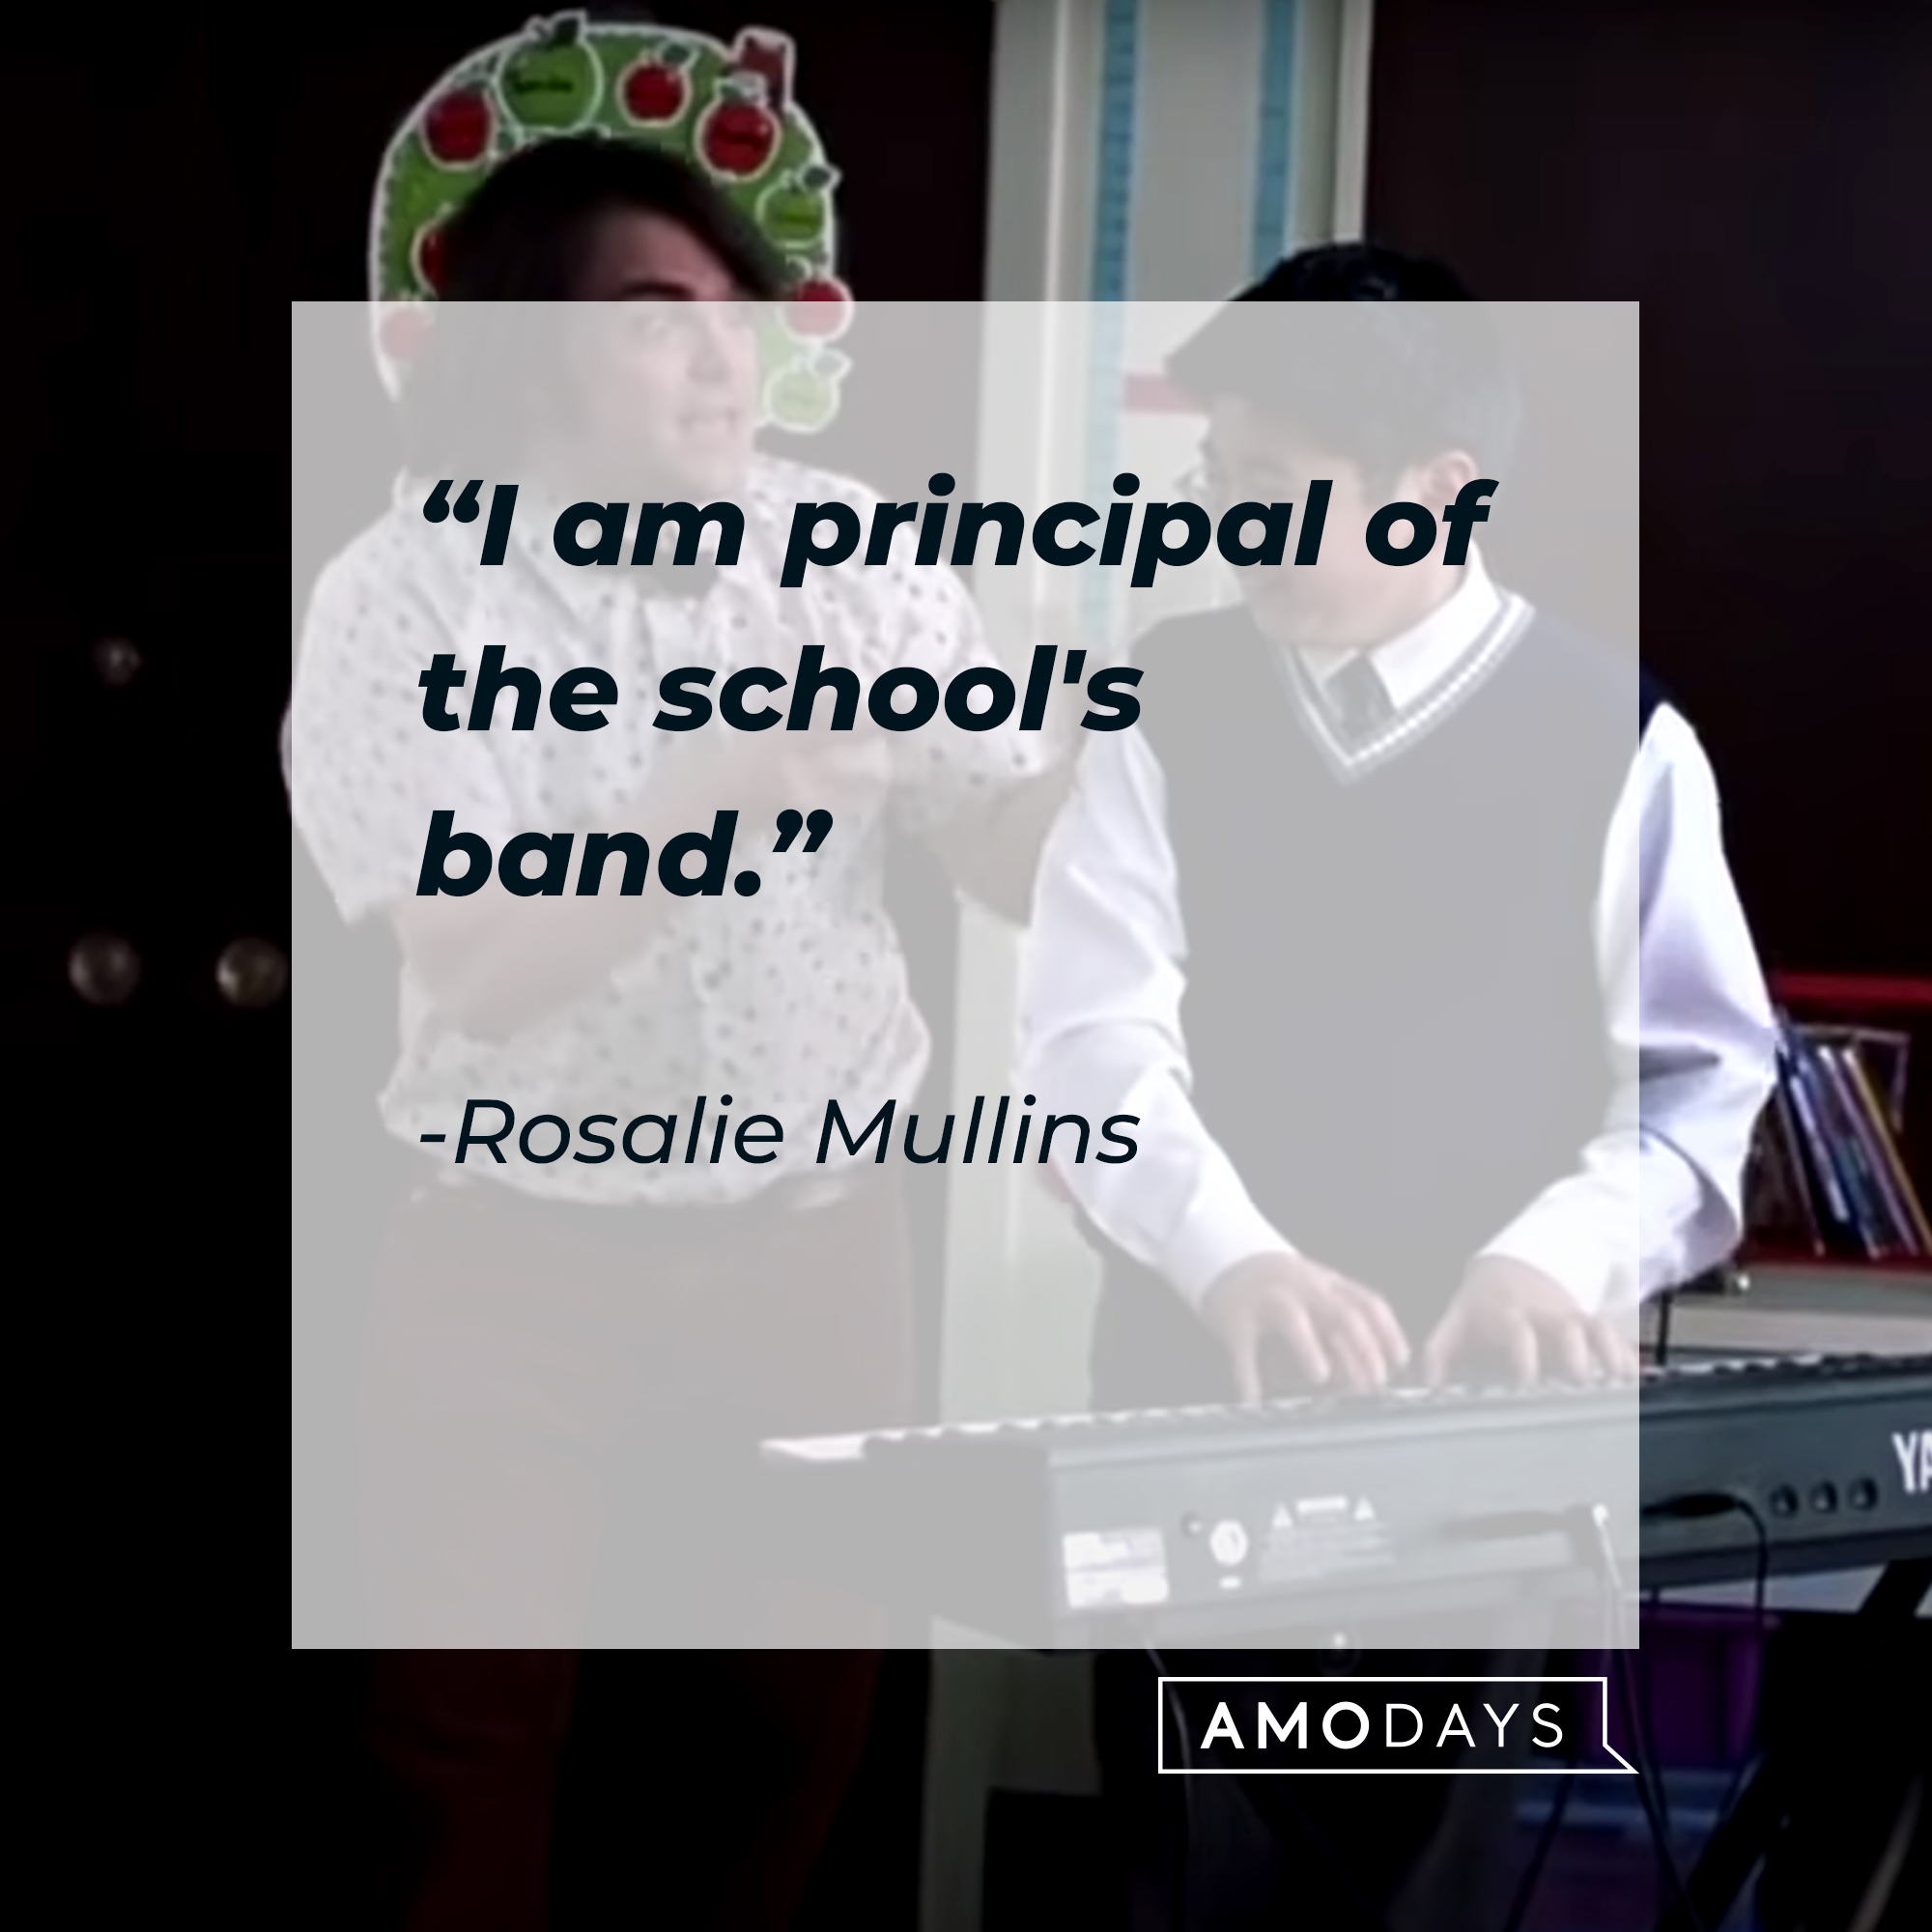 Dewey Finn, with Rosalie Mullins’ quote: “I am principal of the school's band.” | Source: youtube.com/paramountpictures